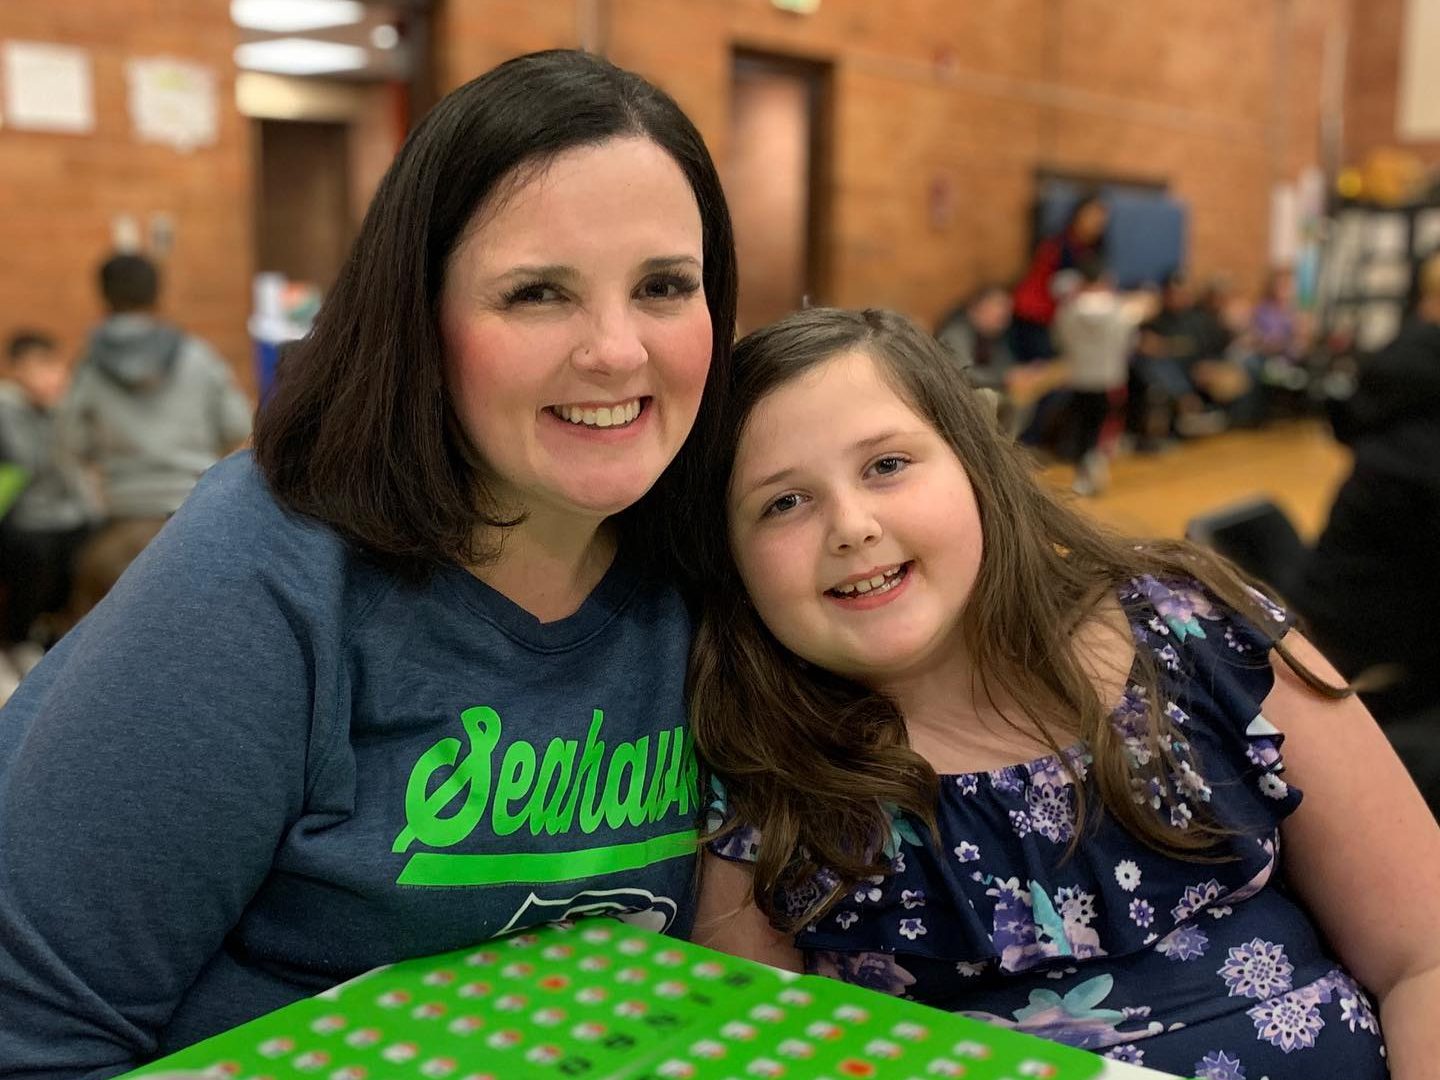 Mother and daughter at elementary school bingo night smiling